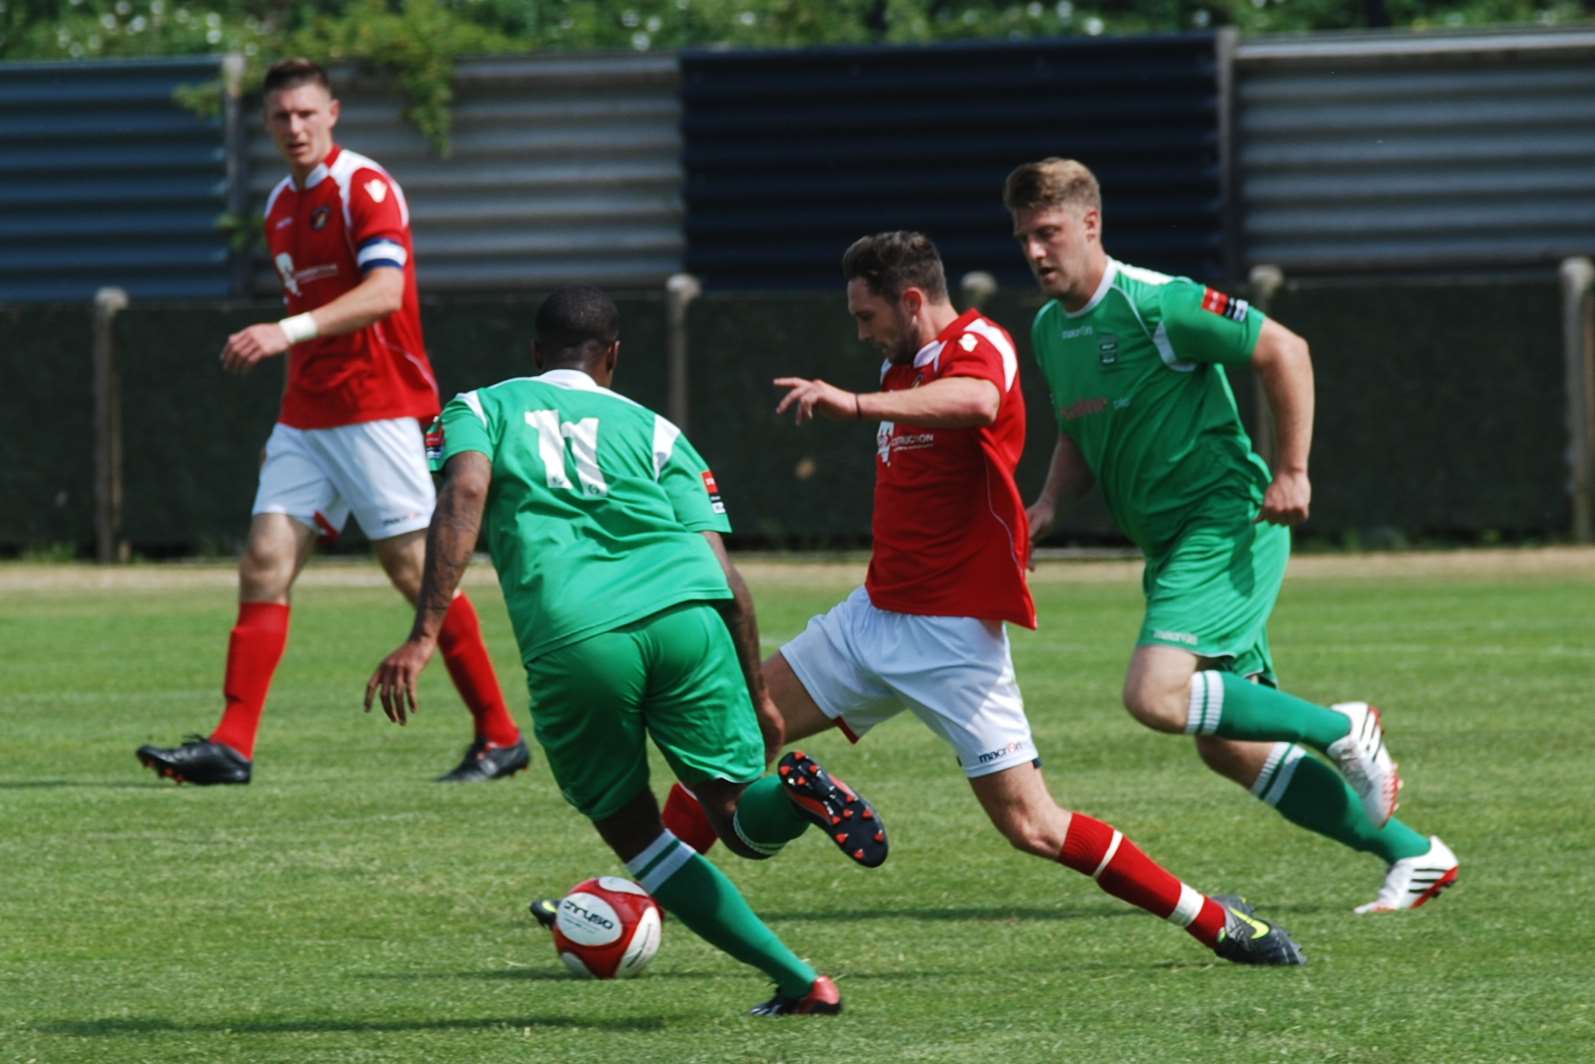 Dean Rance takes on the Thamesmead midfield (Pic: Paul Jarvis)